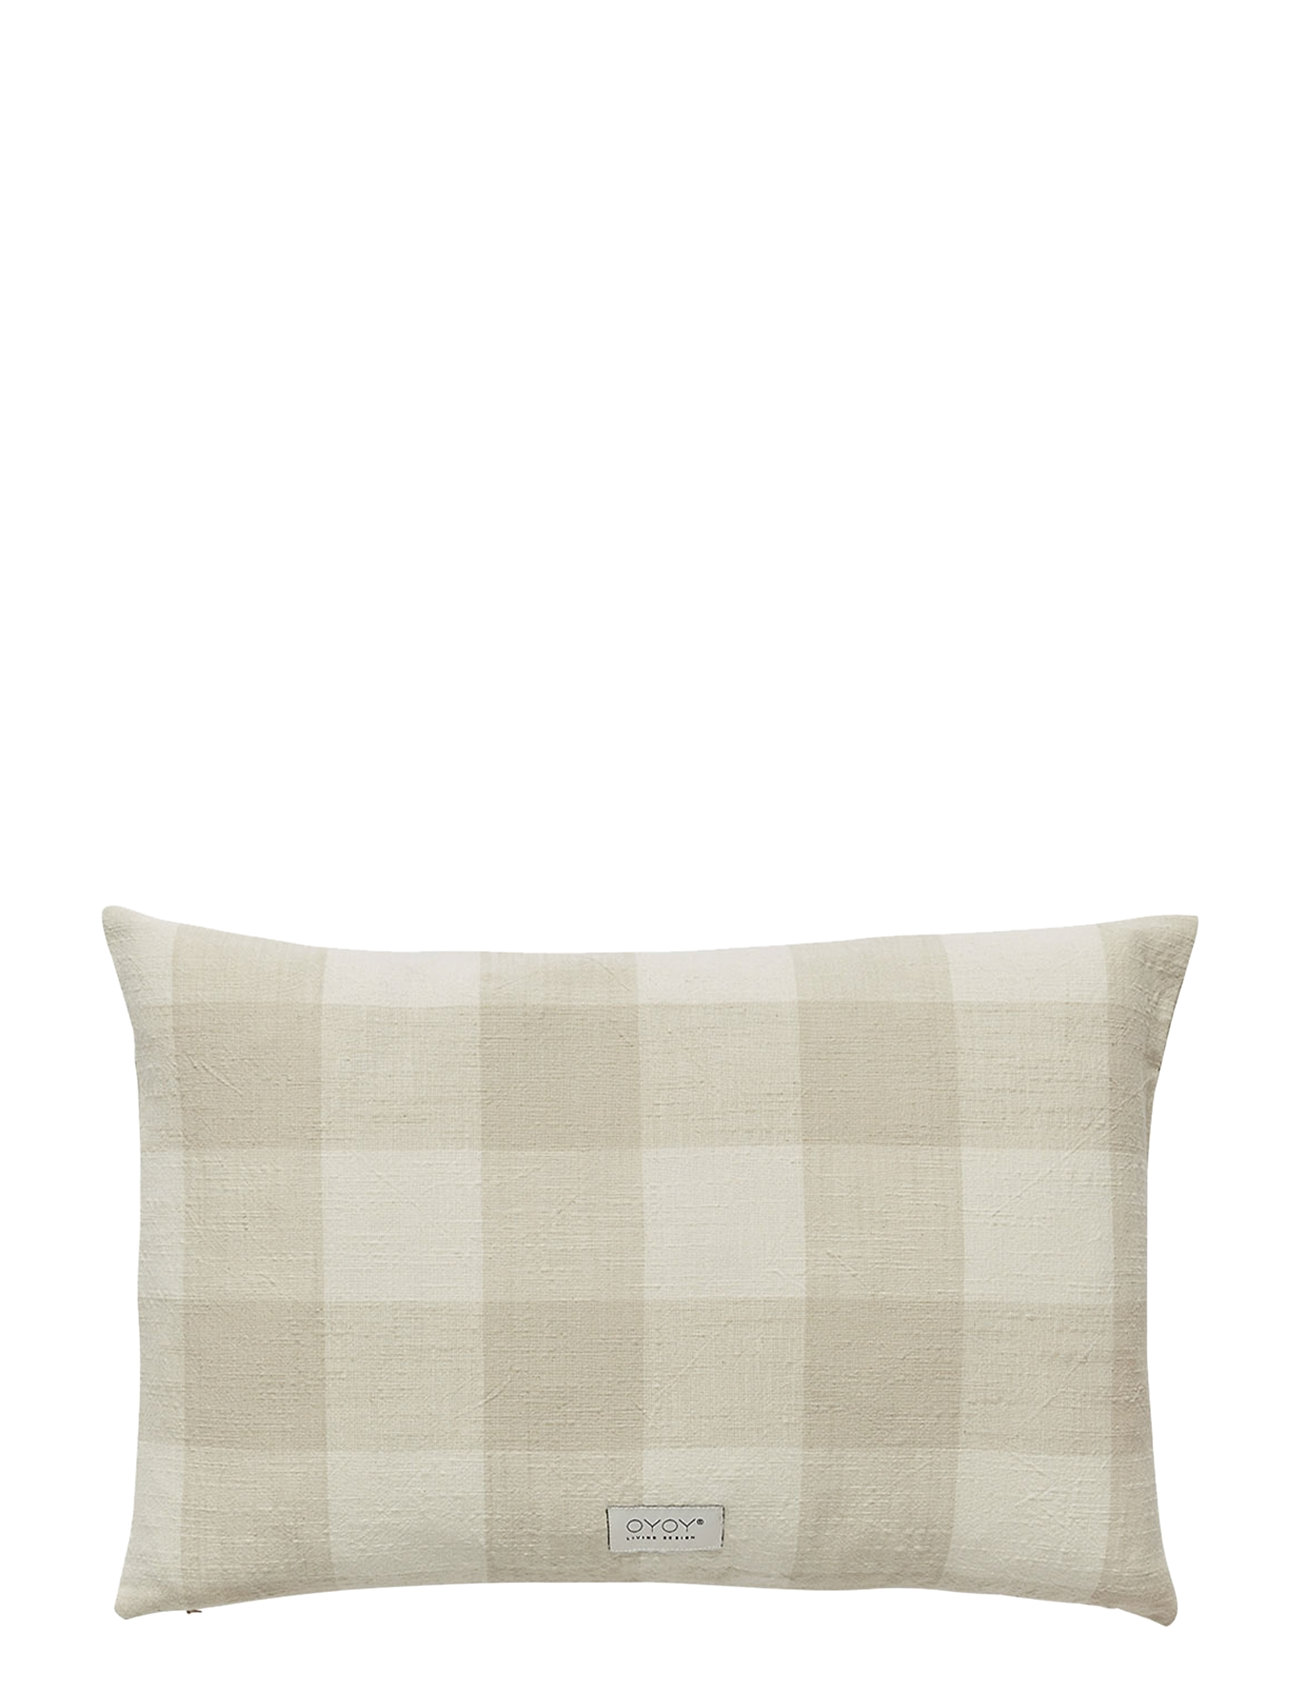 "OYOY Living Design" "Chess Cushion Cover Long Home Textiles Cushions & Blankets Covers Beige OYOY